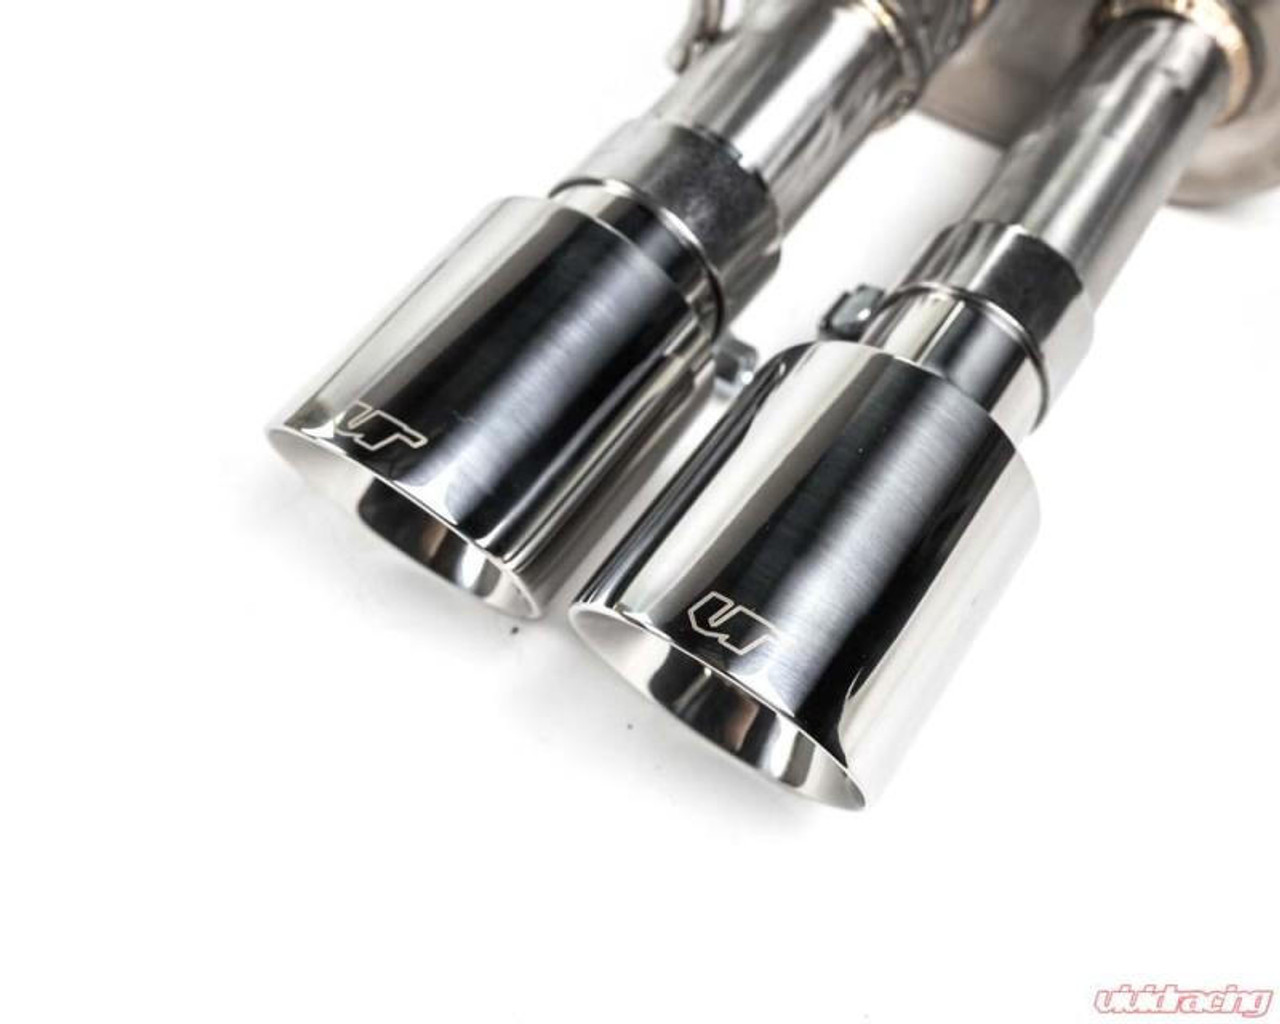 Vivid Racing VR Performance 2013-2017 Audi S6/S7 304 Stainless Exhaust System - VR-S6S7C7-170S 